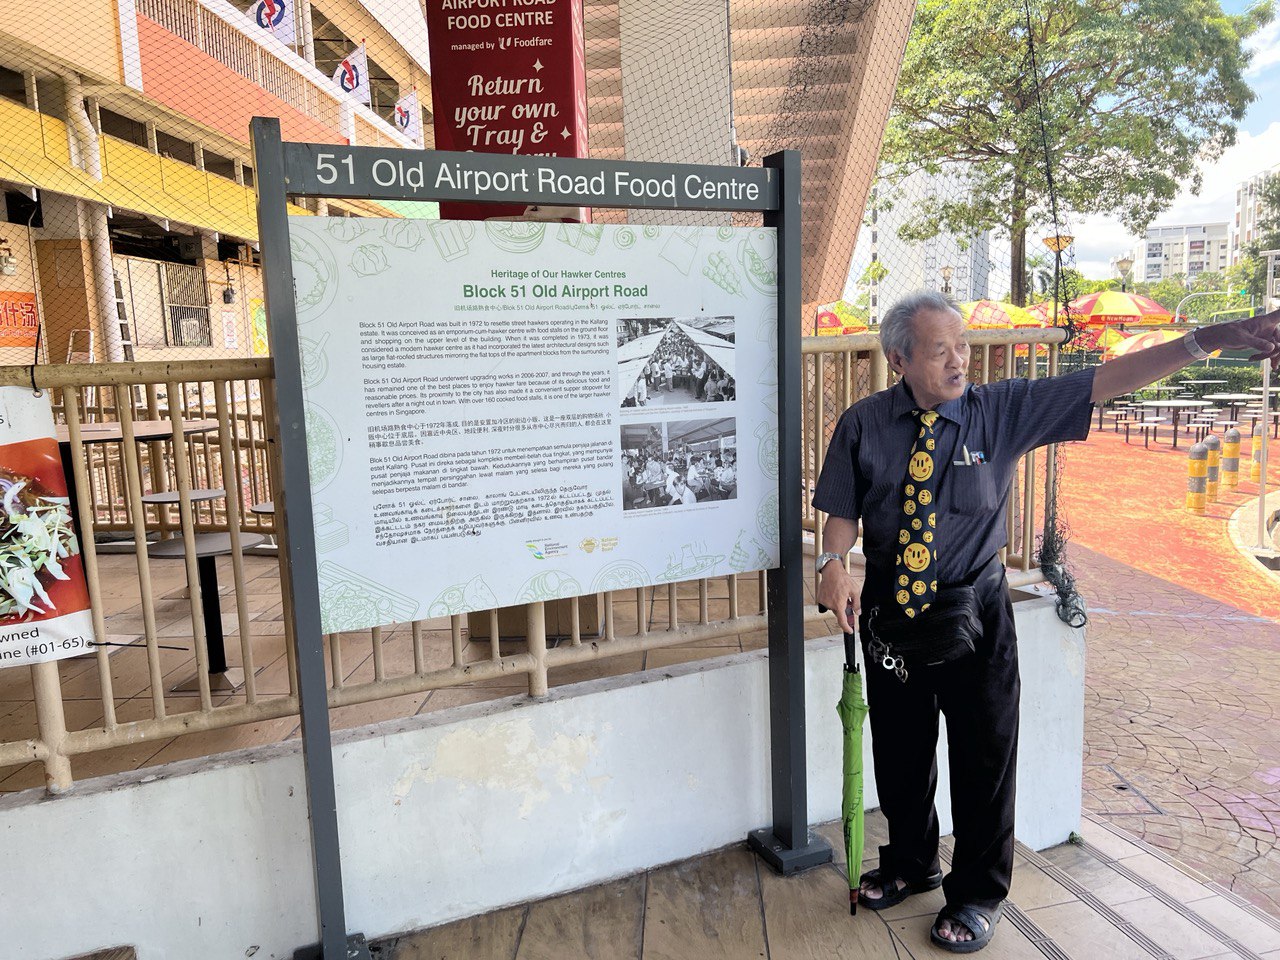 Lai standing next to a sign at Old Airport Road Food Centre, pointing towards the right side of the image.